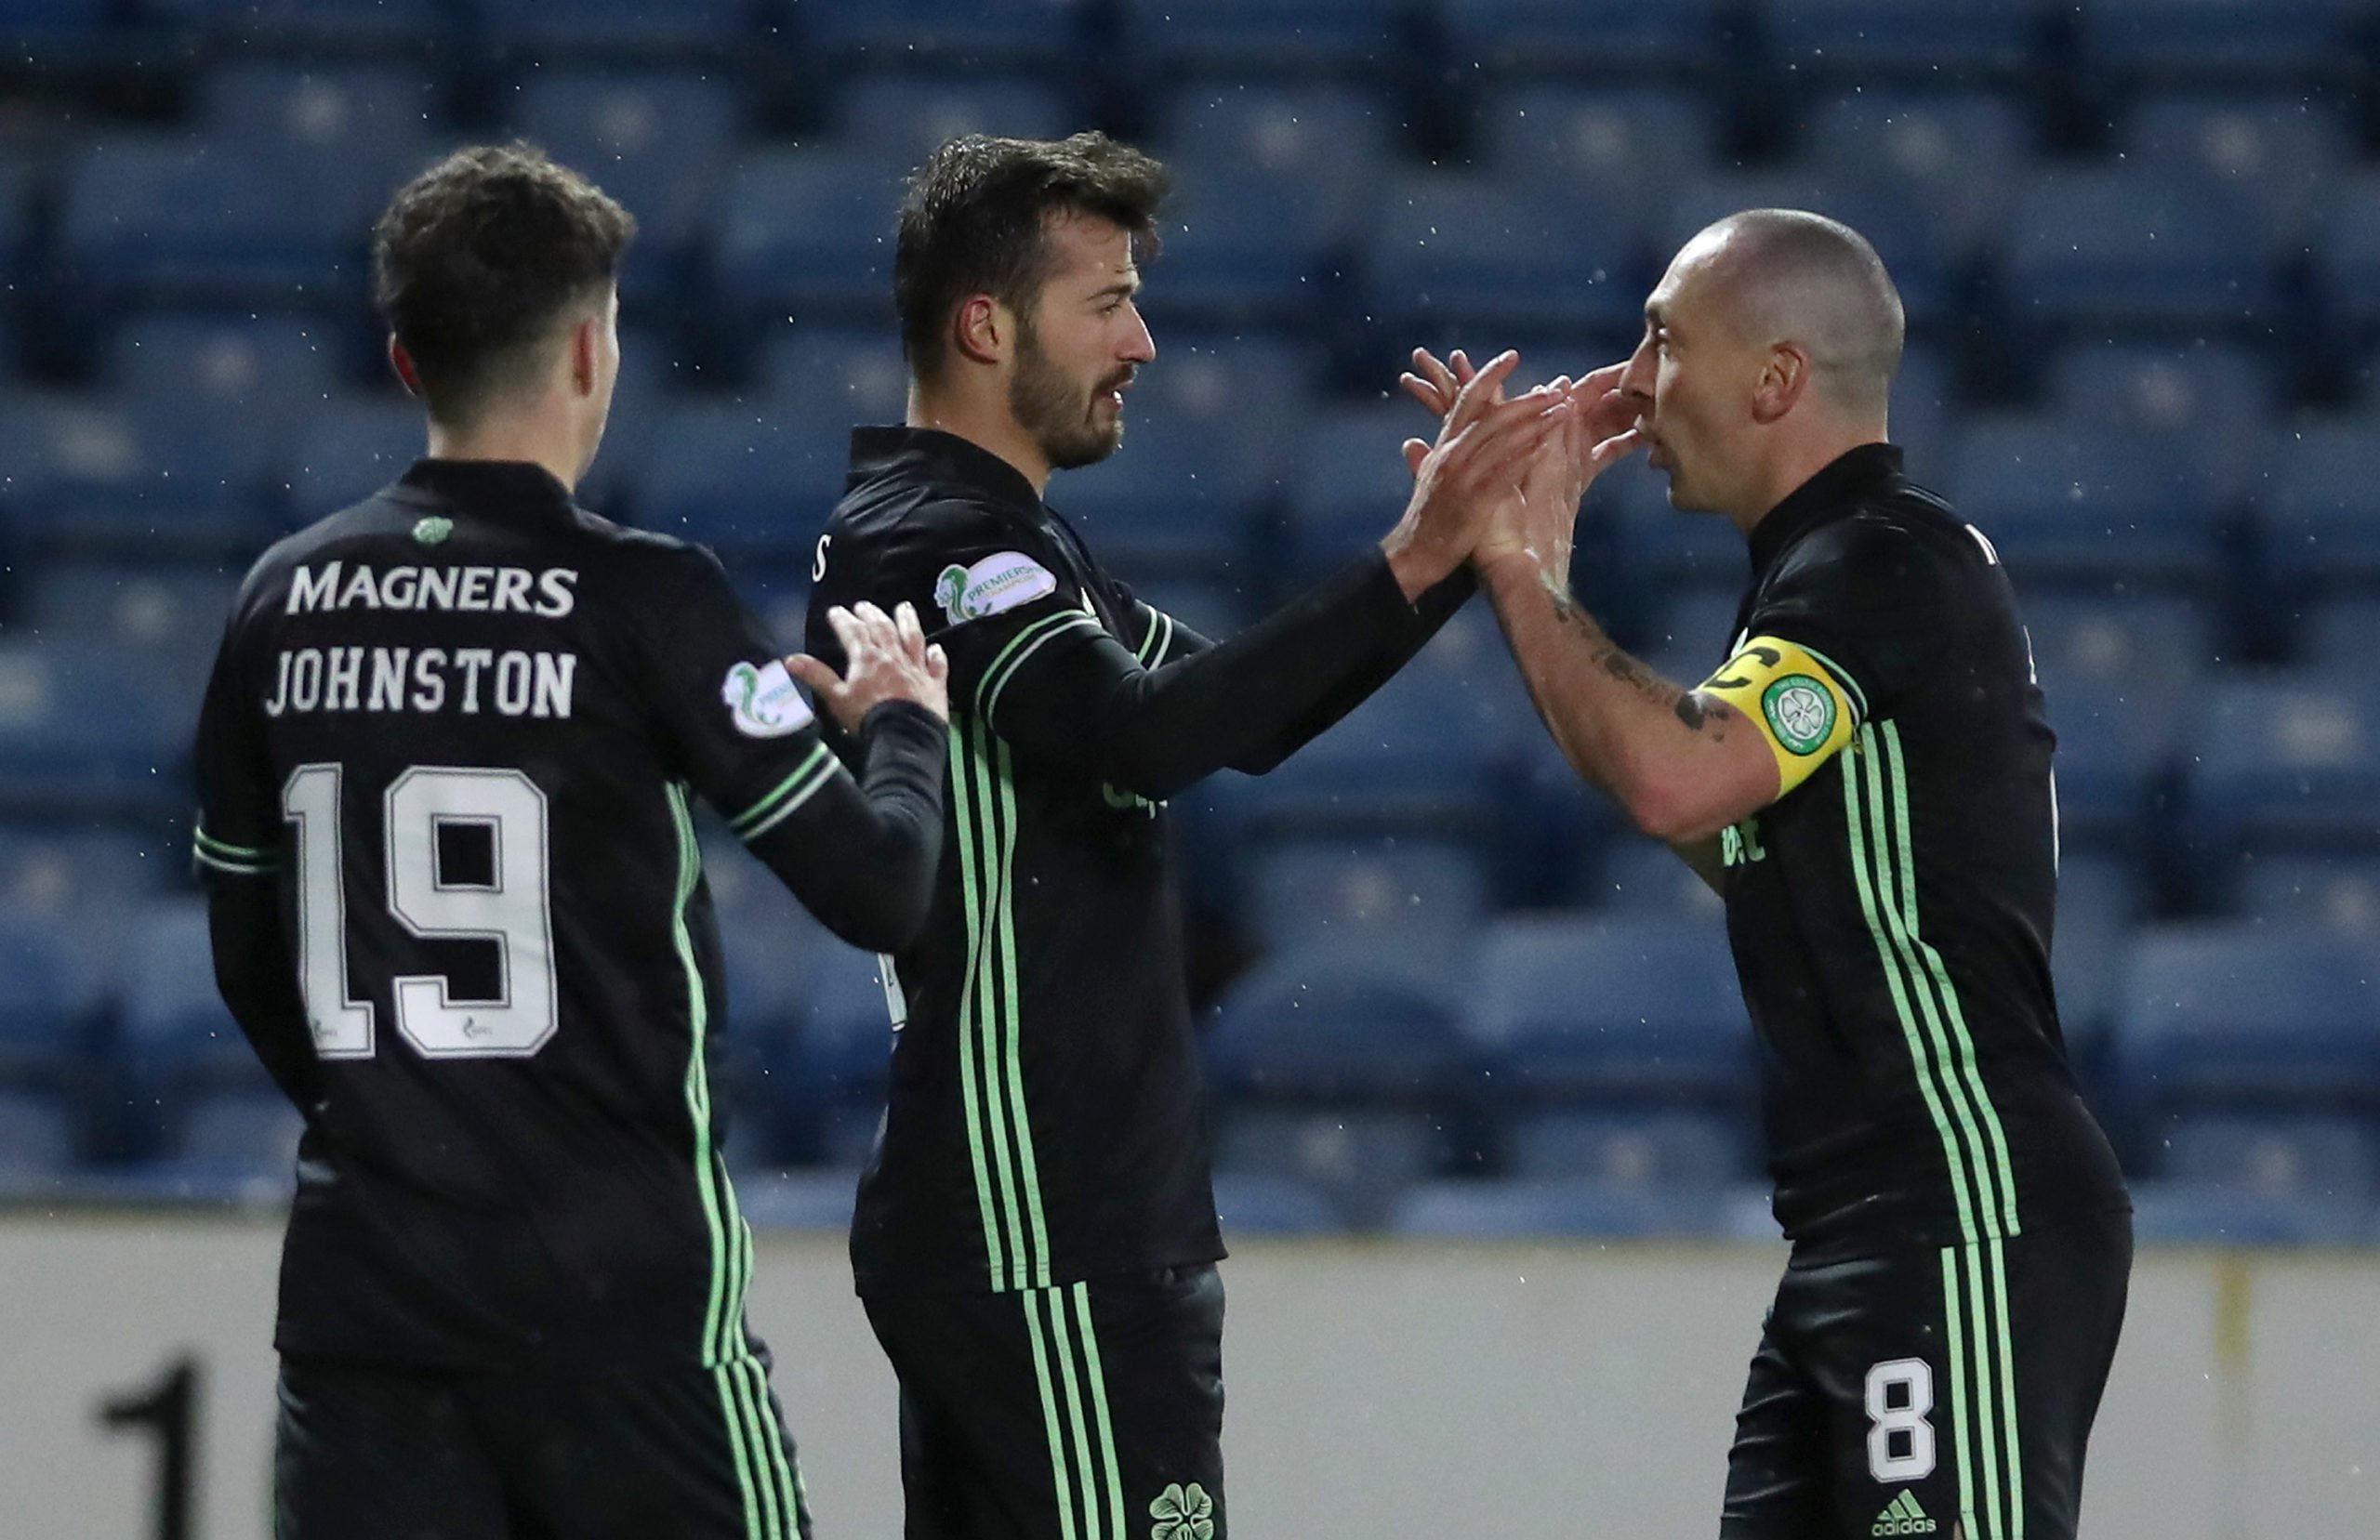 KILMARNOCK, SCOTLAND - FEBRUARY 02: Albian Ajeti of Celtic celebrates with team mate Scott Brown after scoring their side's fourth goal during the Ladbrokes Scottish Premiership match between Kilmarnock and Celtic at Rugby Park on February 02, 2021 in Kilmarnock, Scotland. Sporting stadiums around the UK remain under strict restrictions due to the Coronavirus Pandemic as Government social distancing laws prohibit fans inside venues resulting in games being played behind closed doors. (Photo by Ian MacNicol/Getty Images)